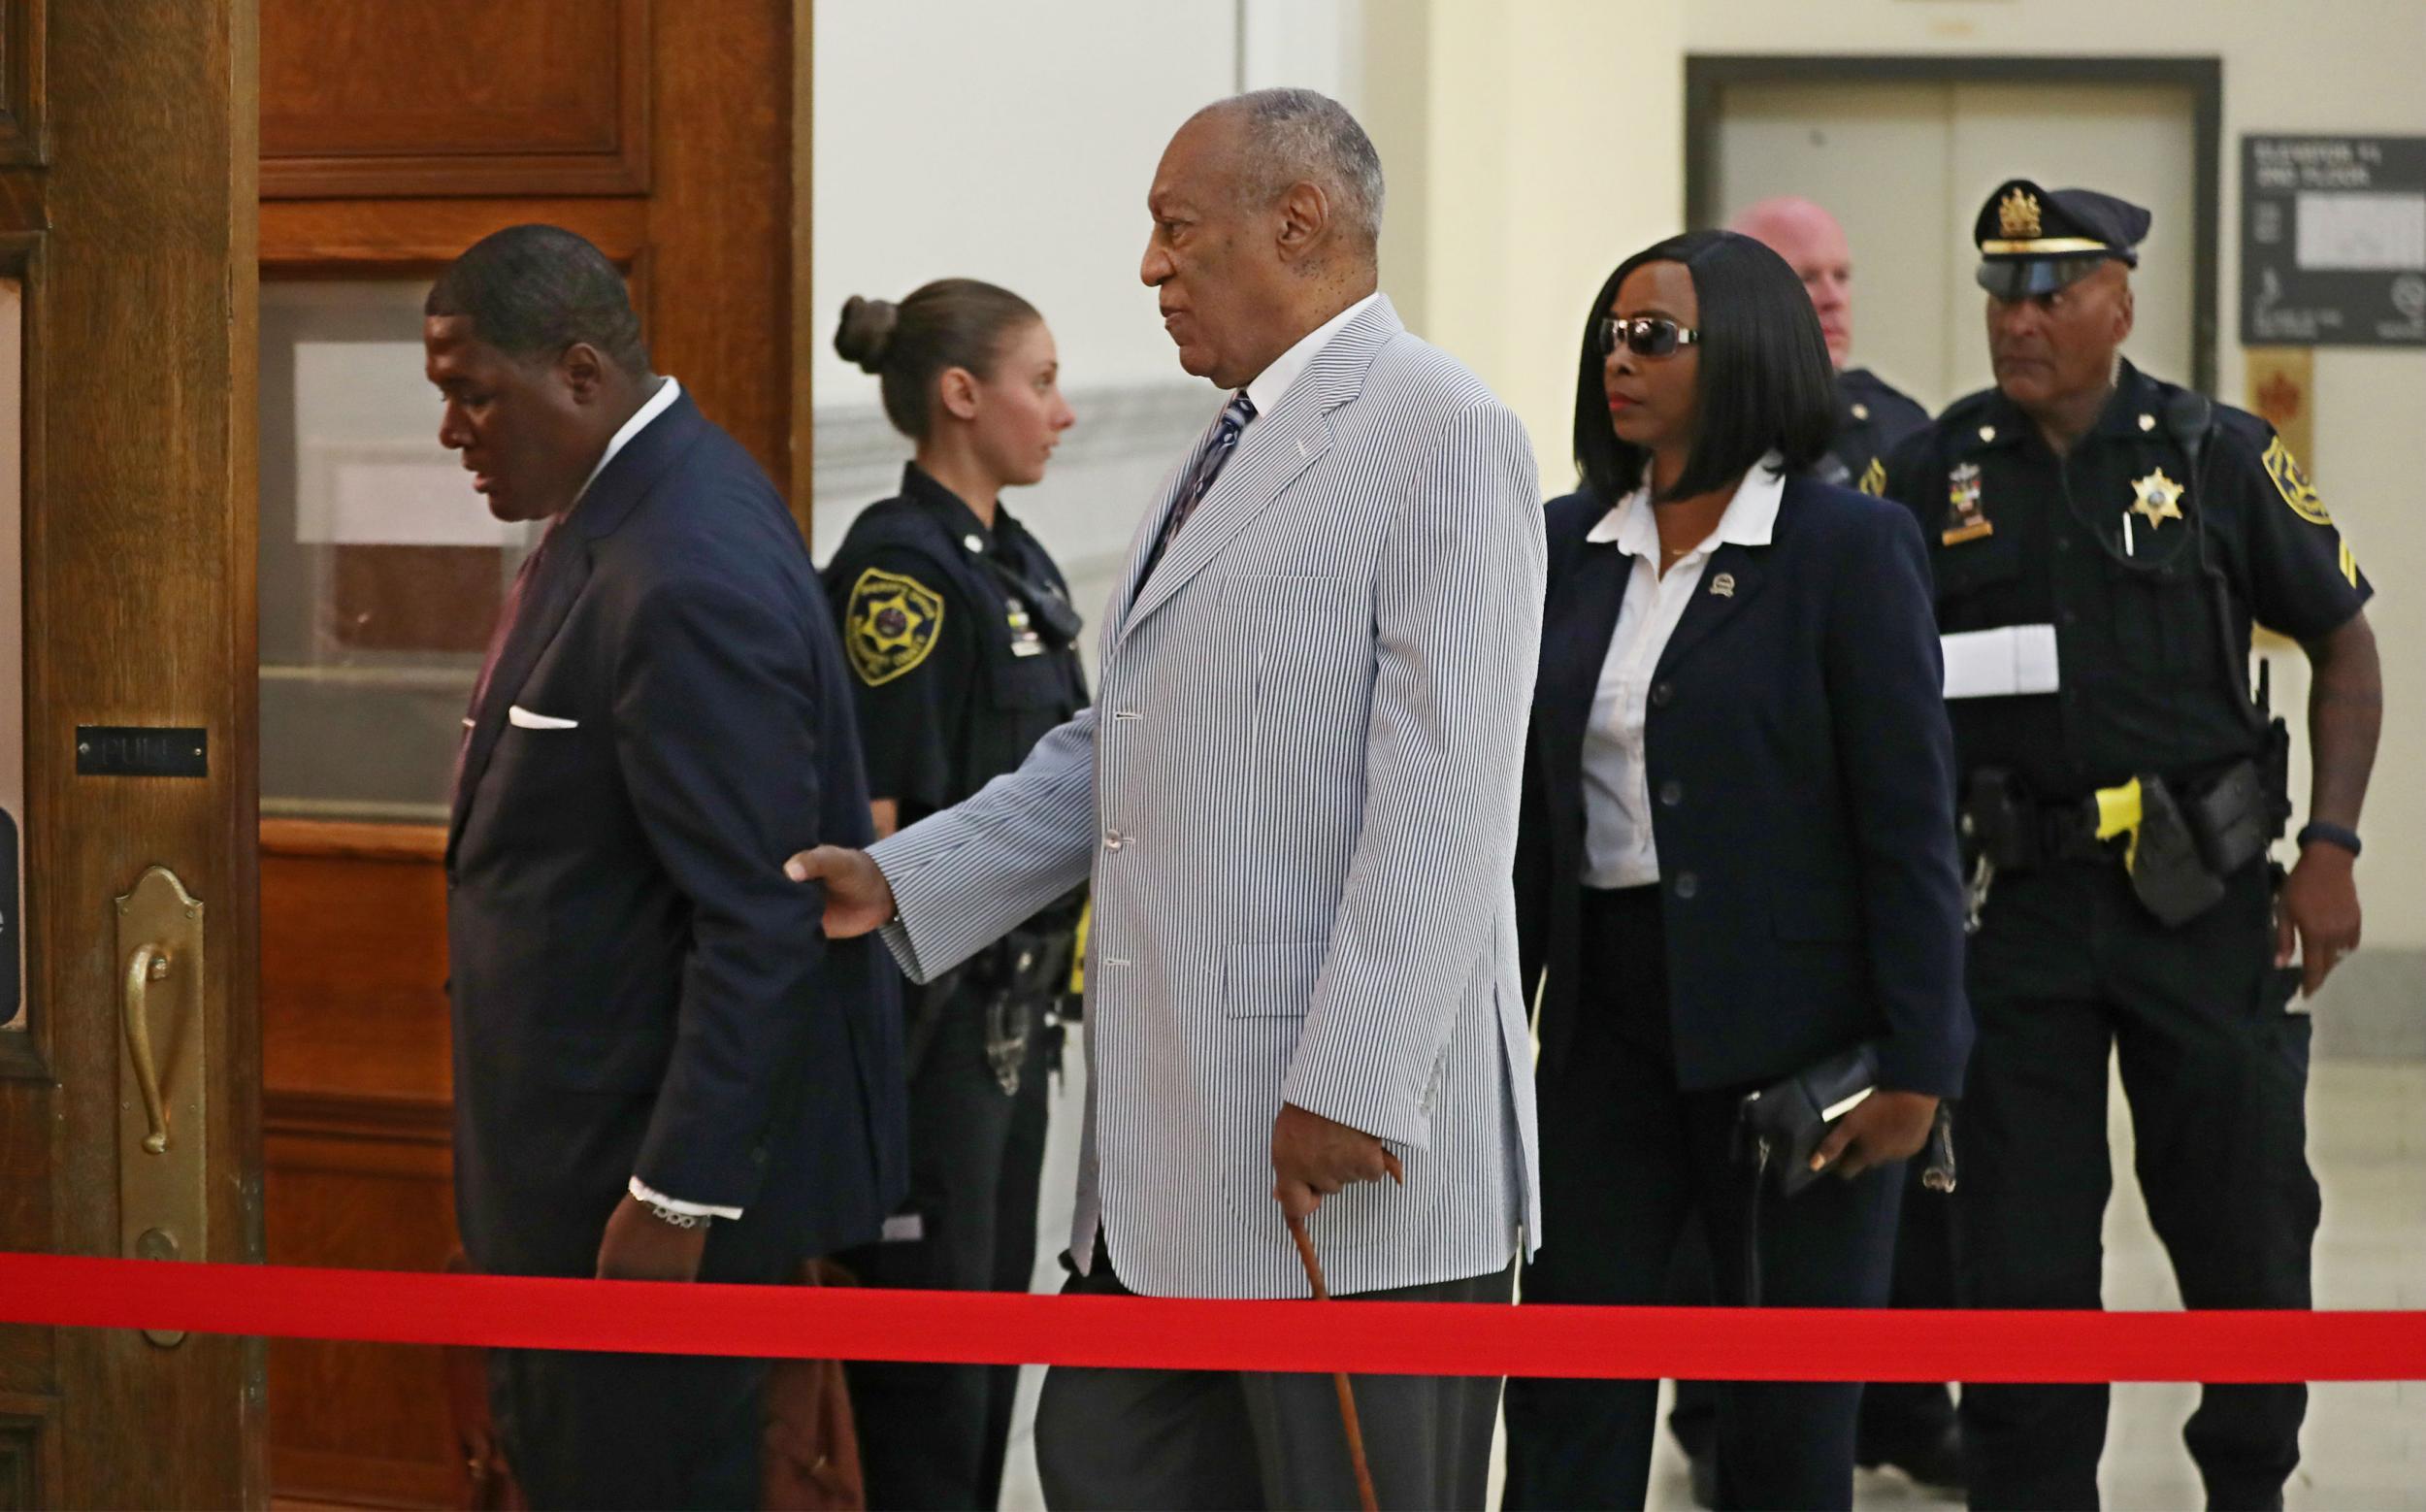 Bill Cosby is led into the court in suburban Philadelphia on Tuesday